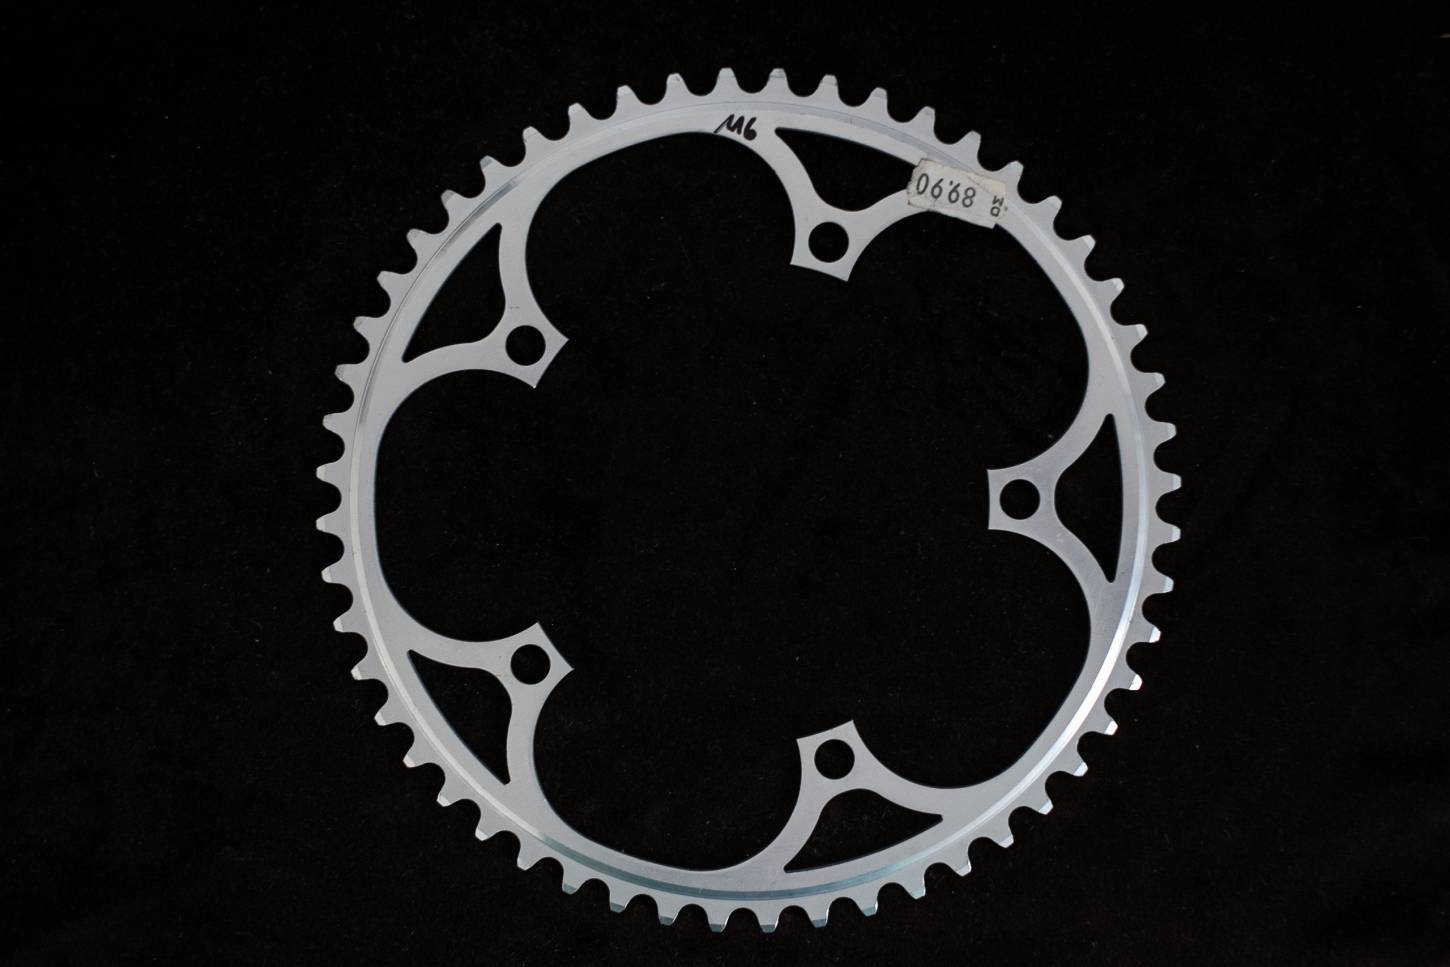 NOS Campagnolo AS chainring / chainring 135 LK 52 teeth